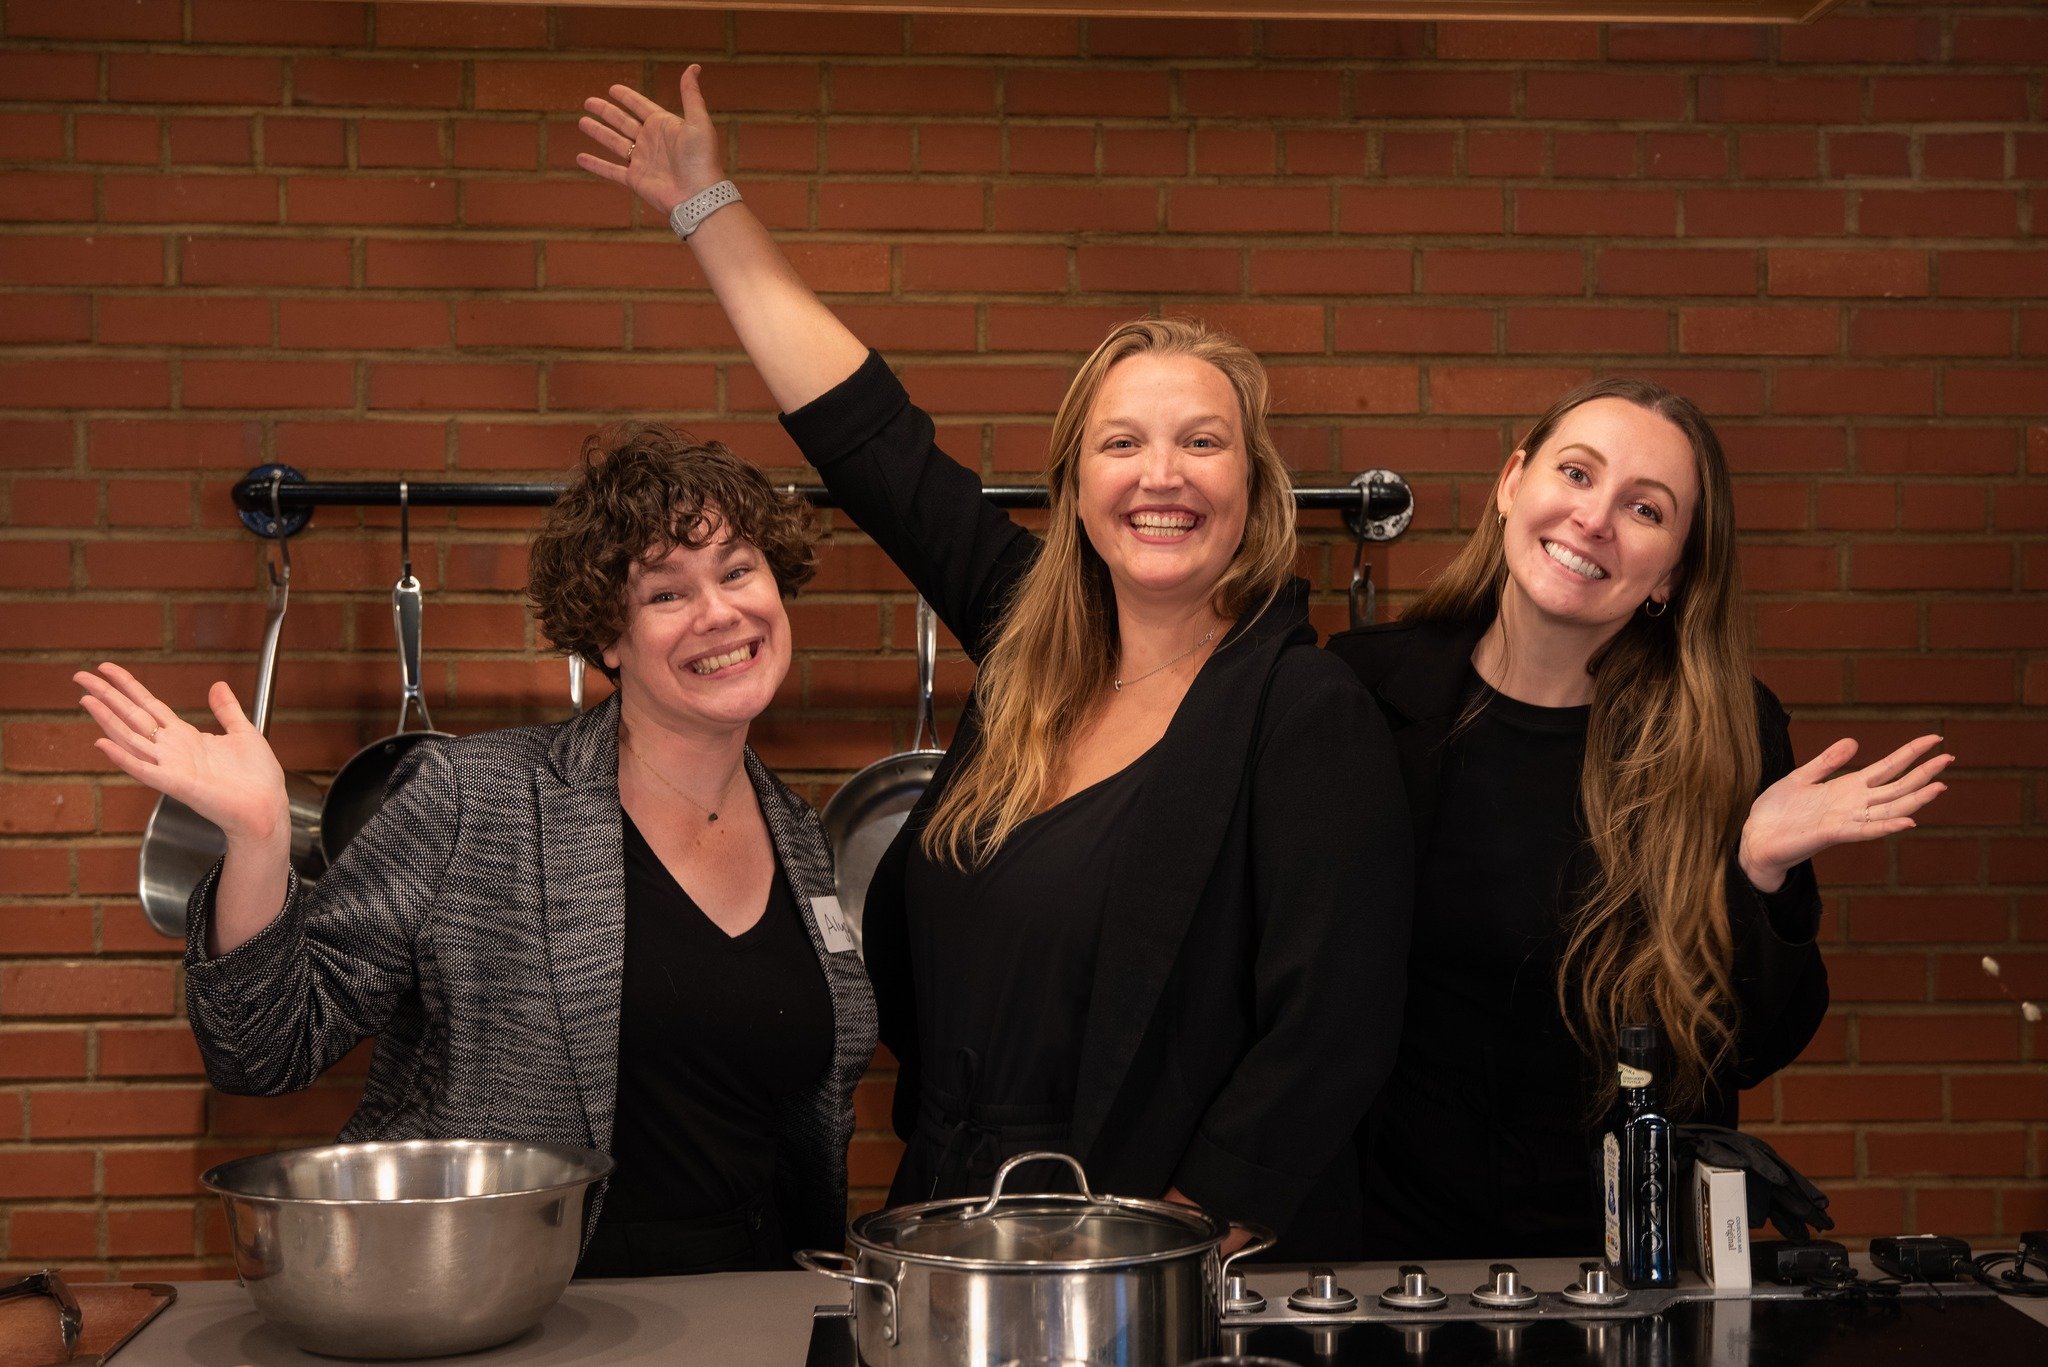 Just over a month ago, we produced the 3rd hybrid dinner for @webuildhearts in Charlotte, North Carolina. Utilizing Zoom Meeting for a virtual cook-along, we set-up a studio-like cooking show at @chefalyssaclt and entertained 40 people in-person and 